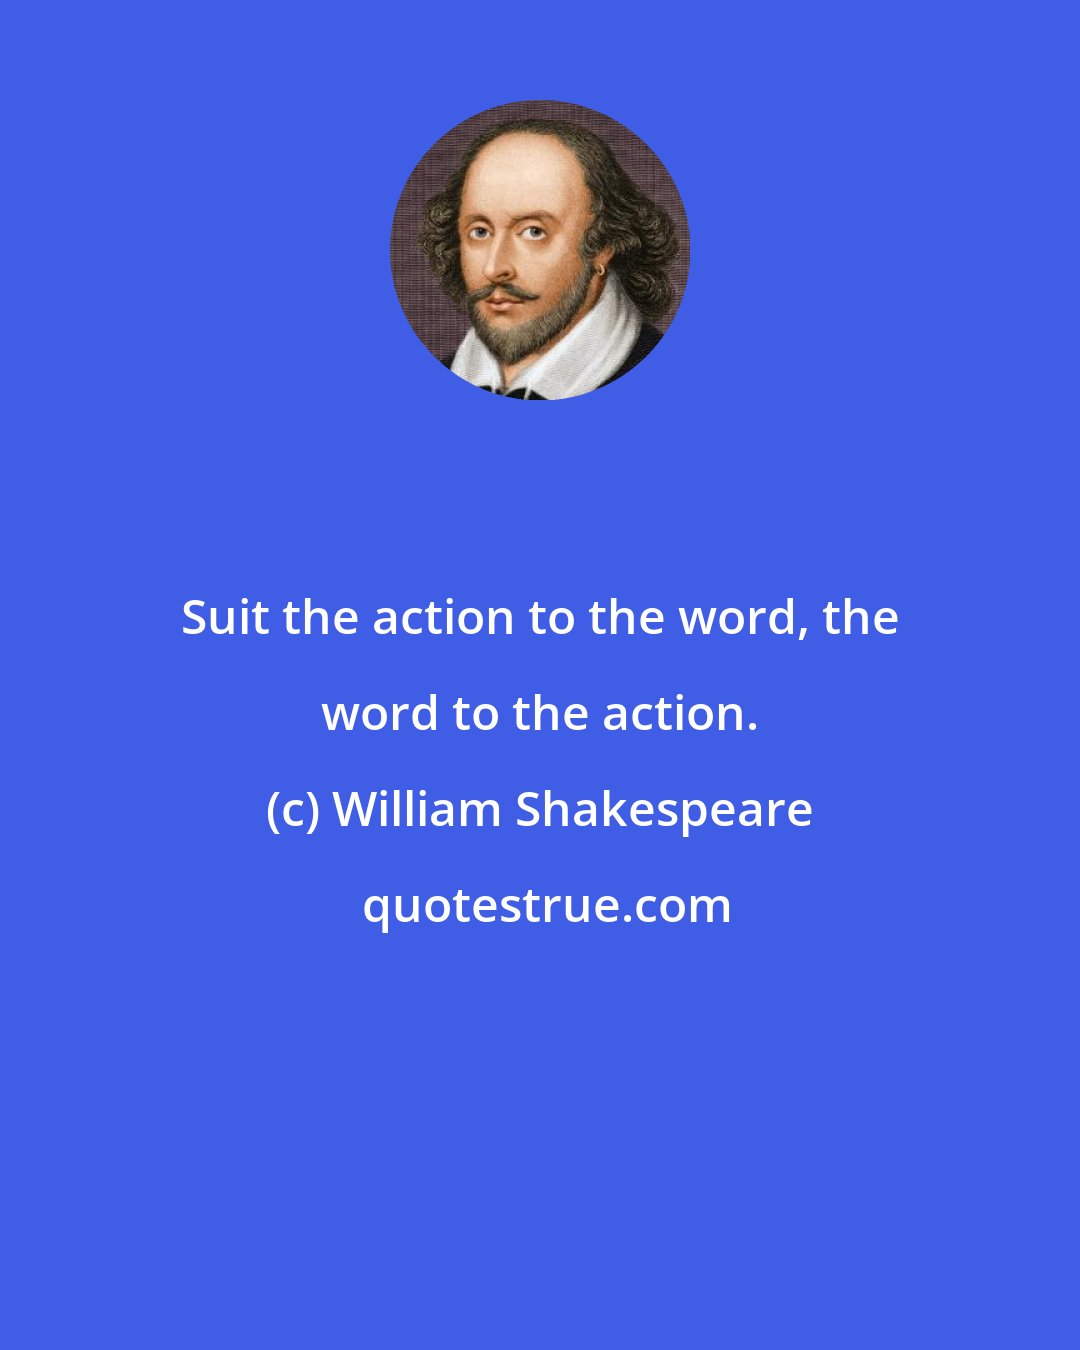 William Shakespeare: Suit the action to the word, the word to the action.